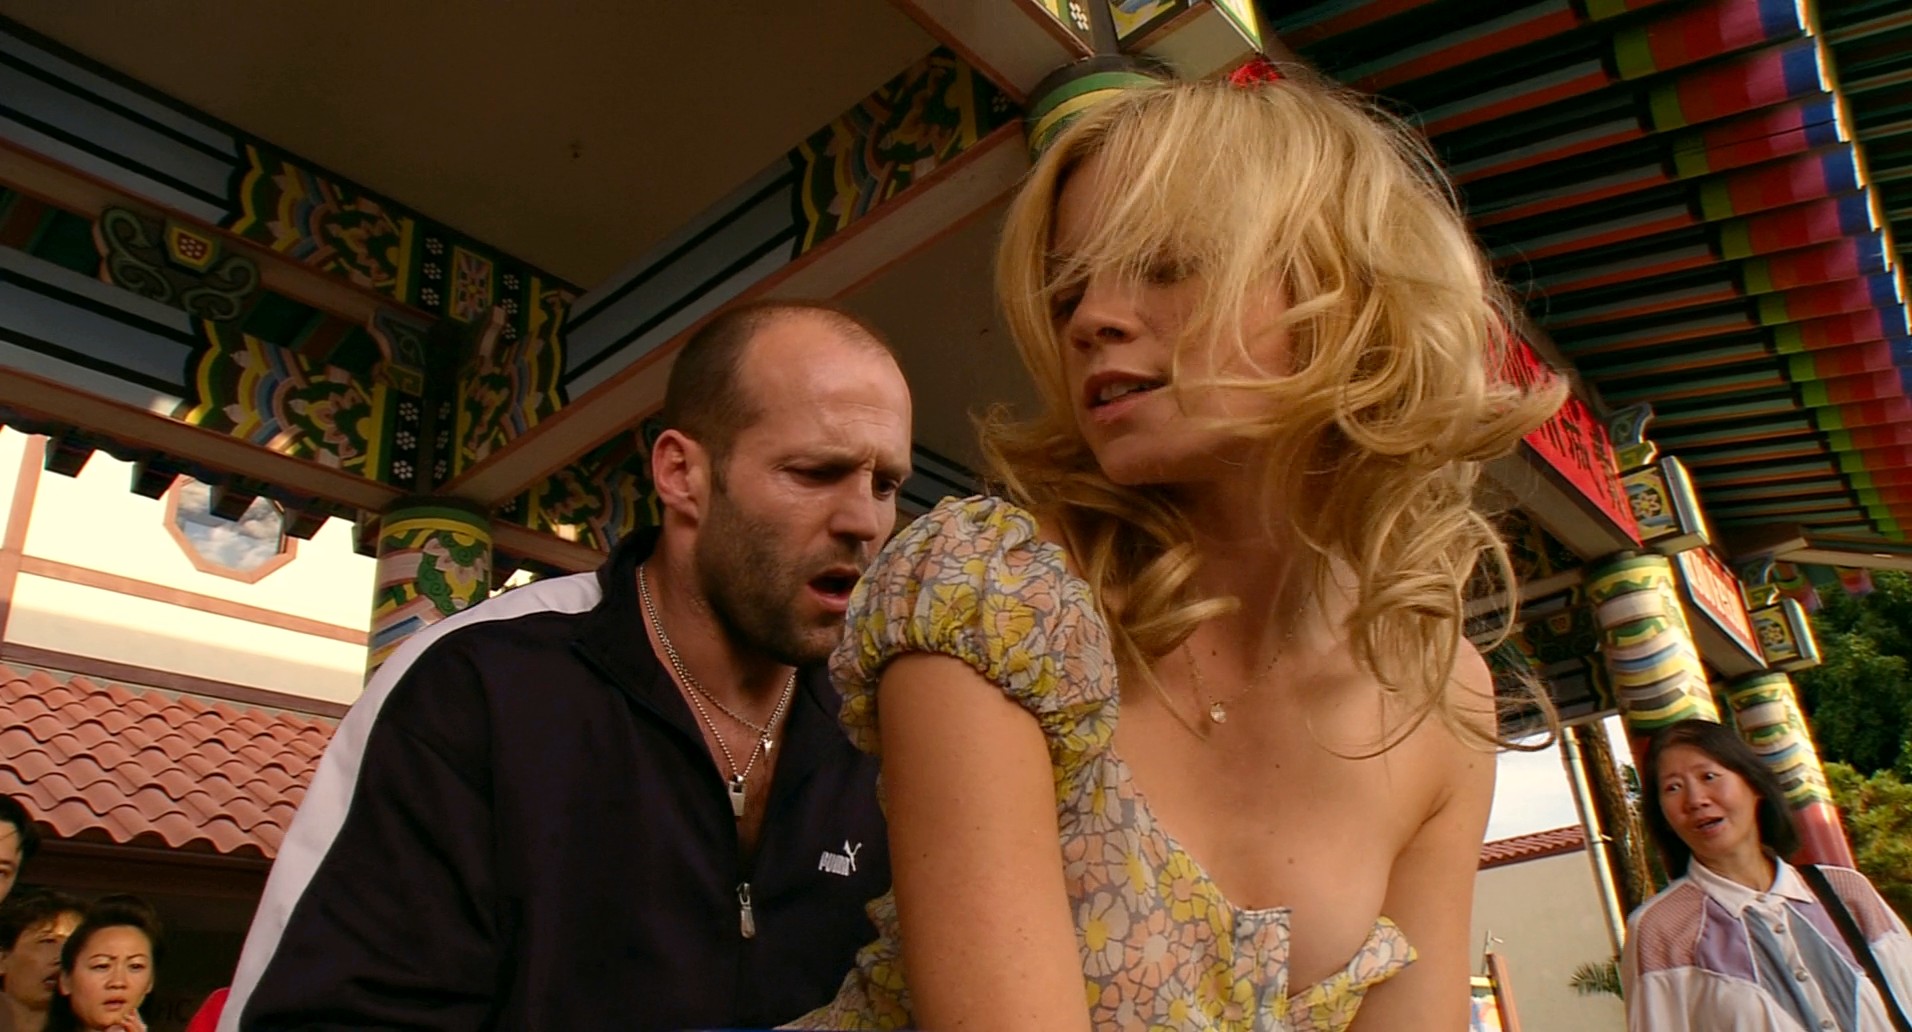 Jason statham in Crank (2006) - his character injected with a deadly 

poison, must keep his adrenaline pumping in order to live. To keep 

himself alive, he suddenly decides to have sex with his girlfriend in 

the middle of Chinatown, with people watching. Watching Statham hump 

Amy Smart with a ridiculous face showing a mixture of pain and 

confusion is more than enough to make you cringe.